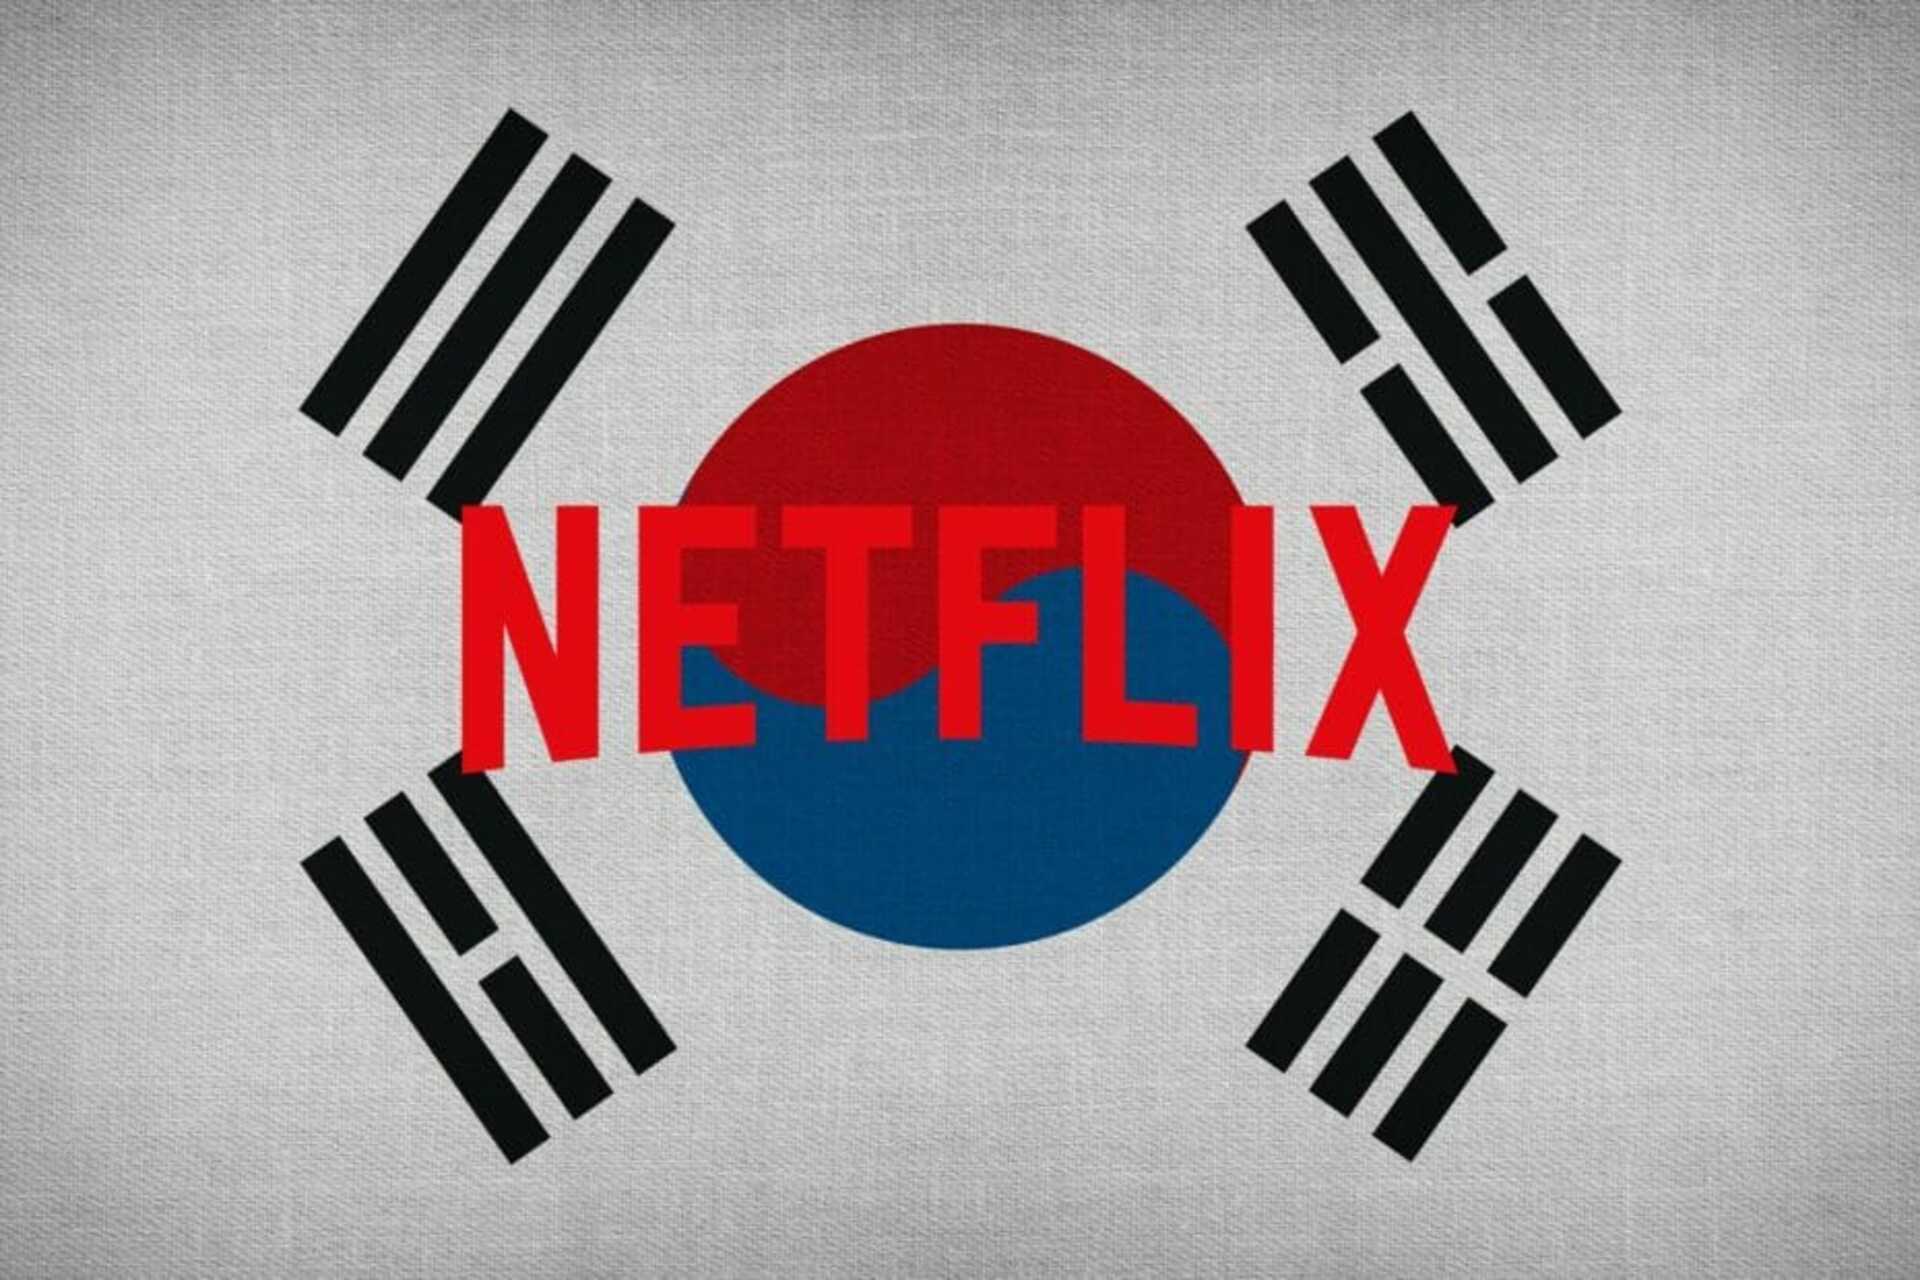 3 best VPNs for Korean Netflix to watch your favorite shows